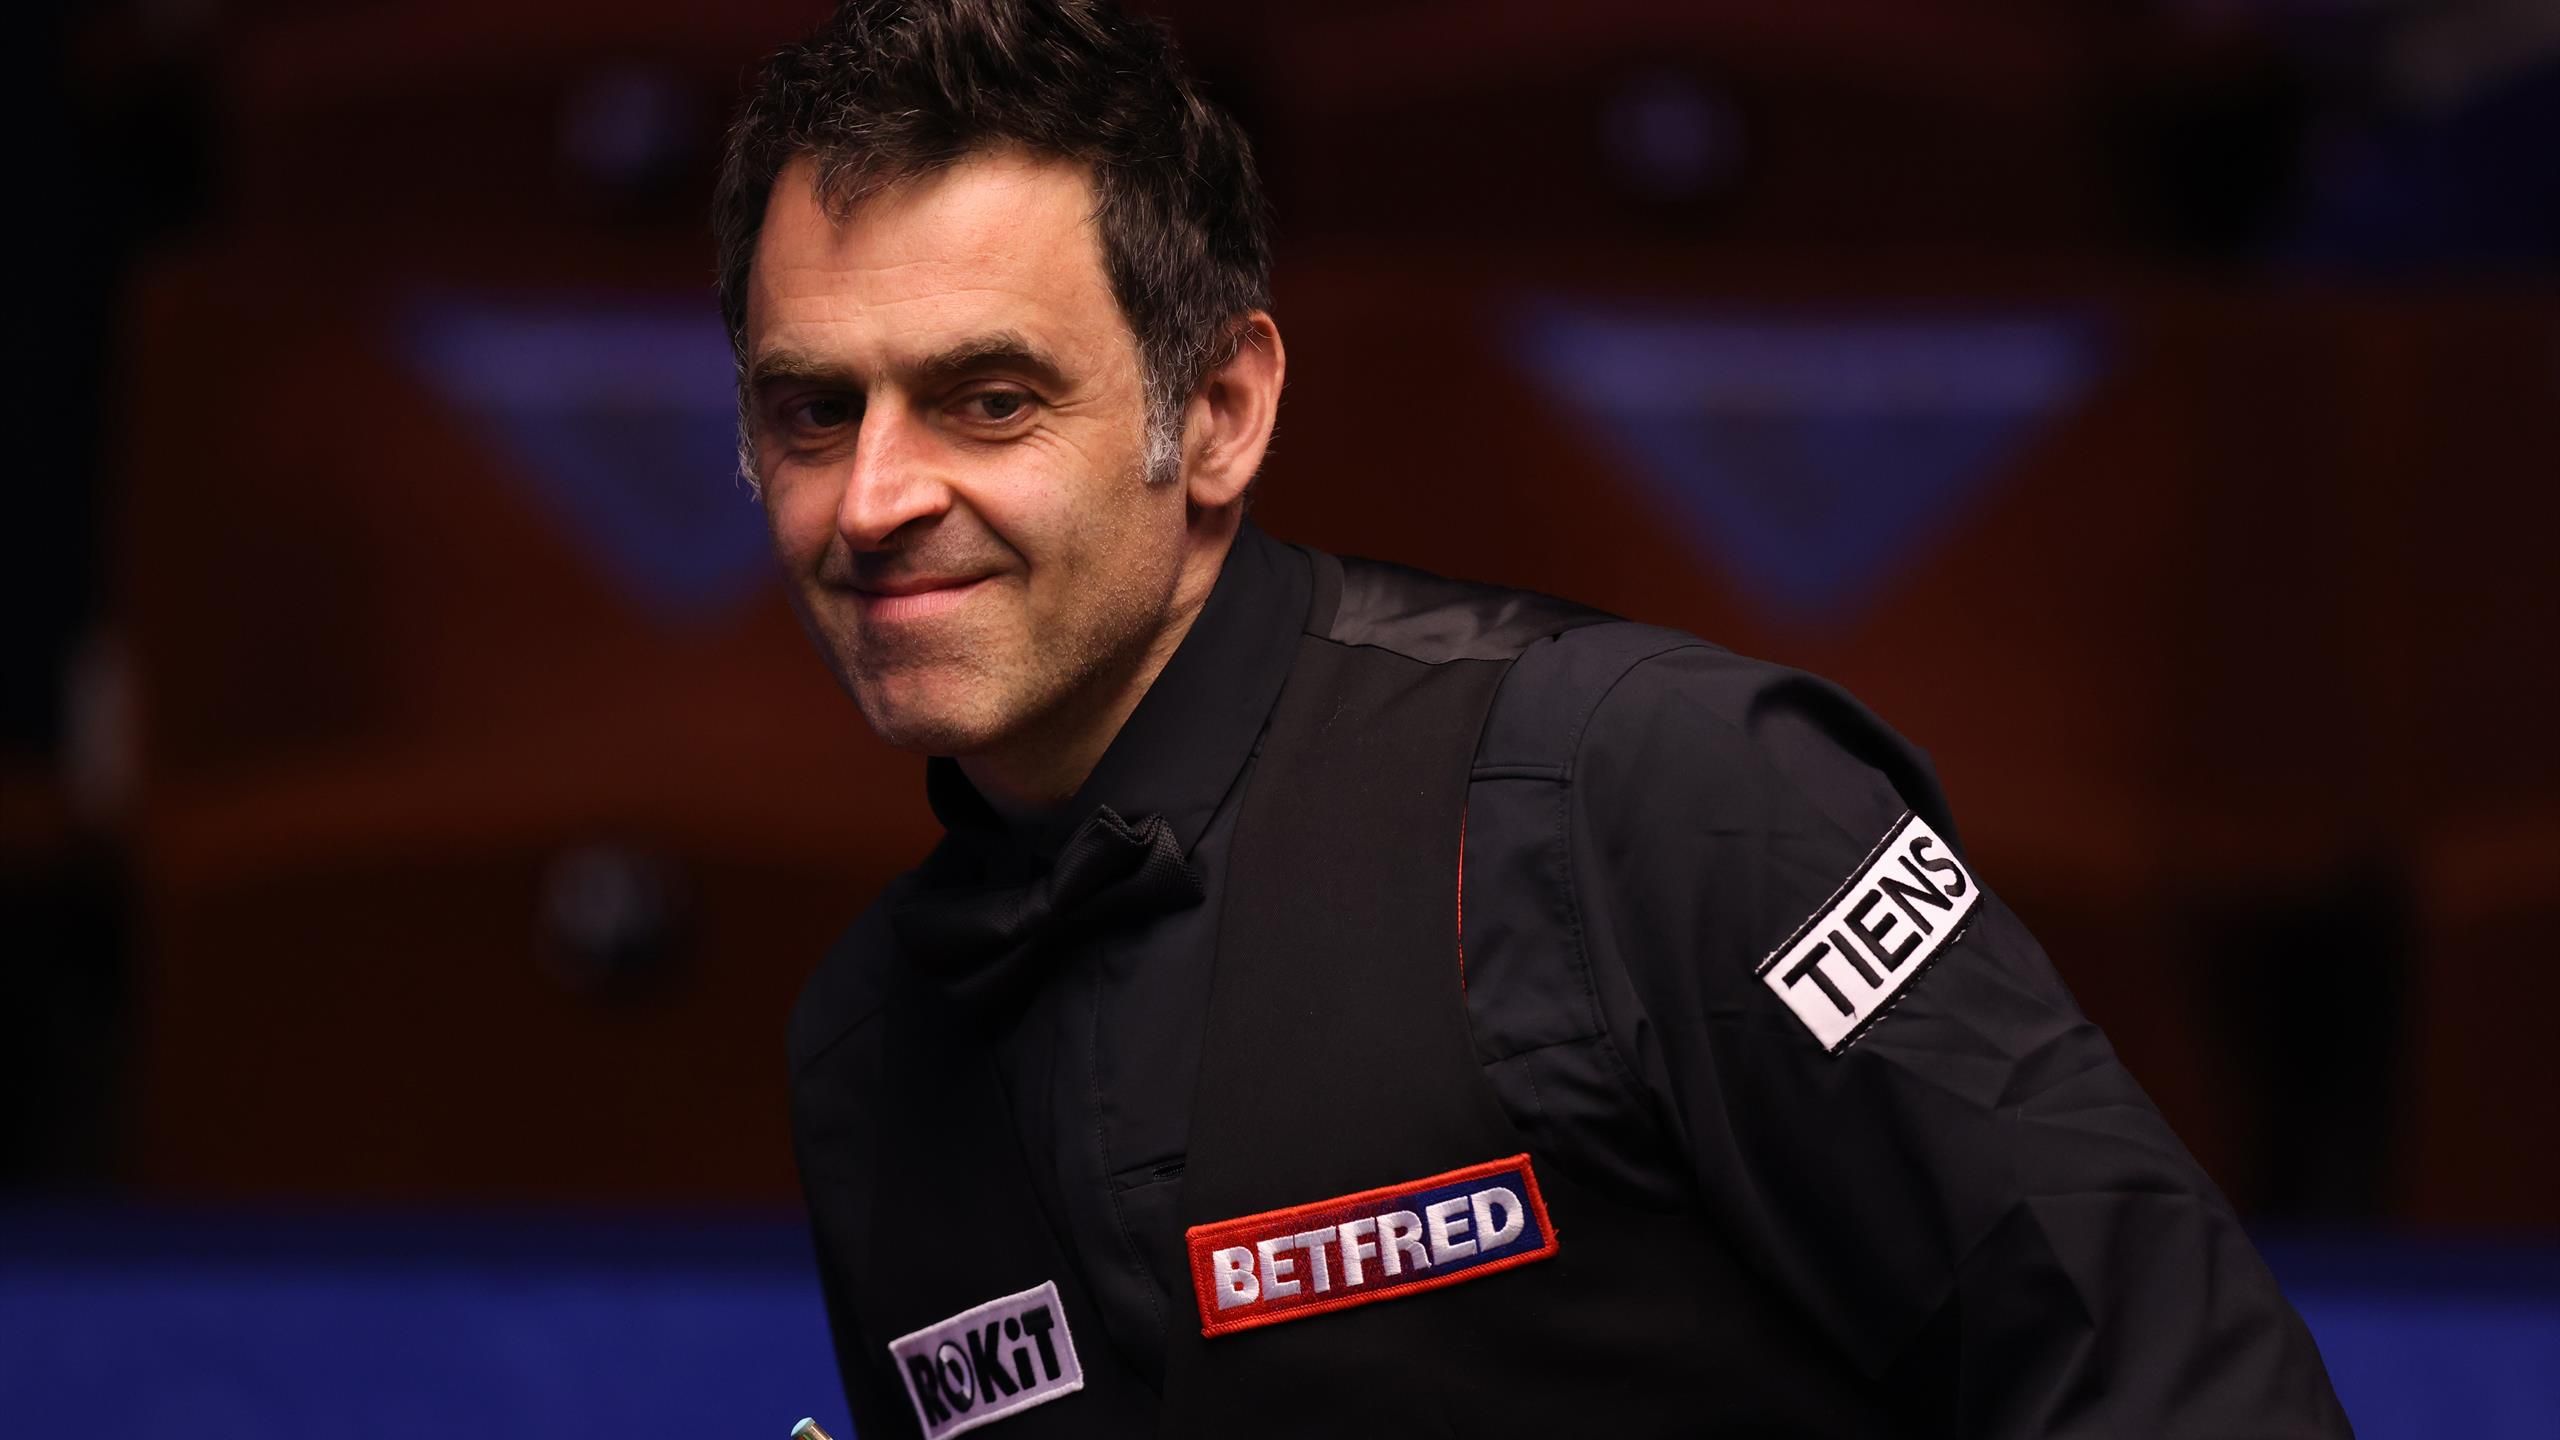 Champion of Champions 2022 - Latest scores, results, schedule, order of play, Ronnie OSullivan, Judd Trump